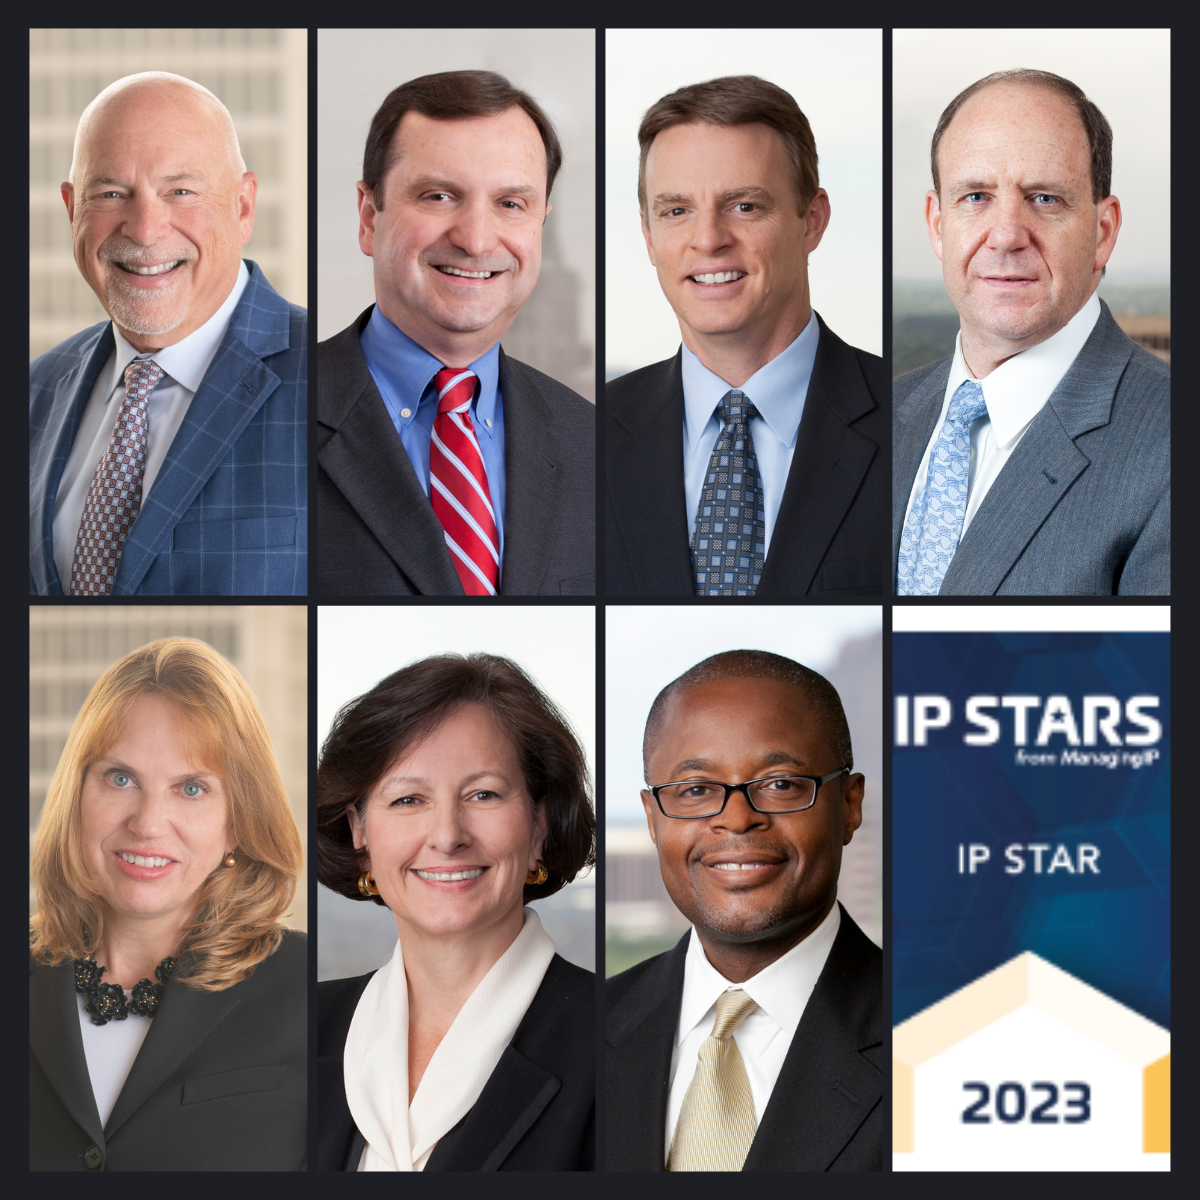 Patent Stars 2023 at Cantor Colburn